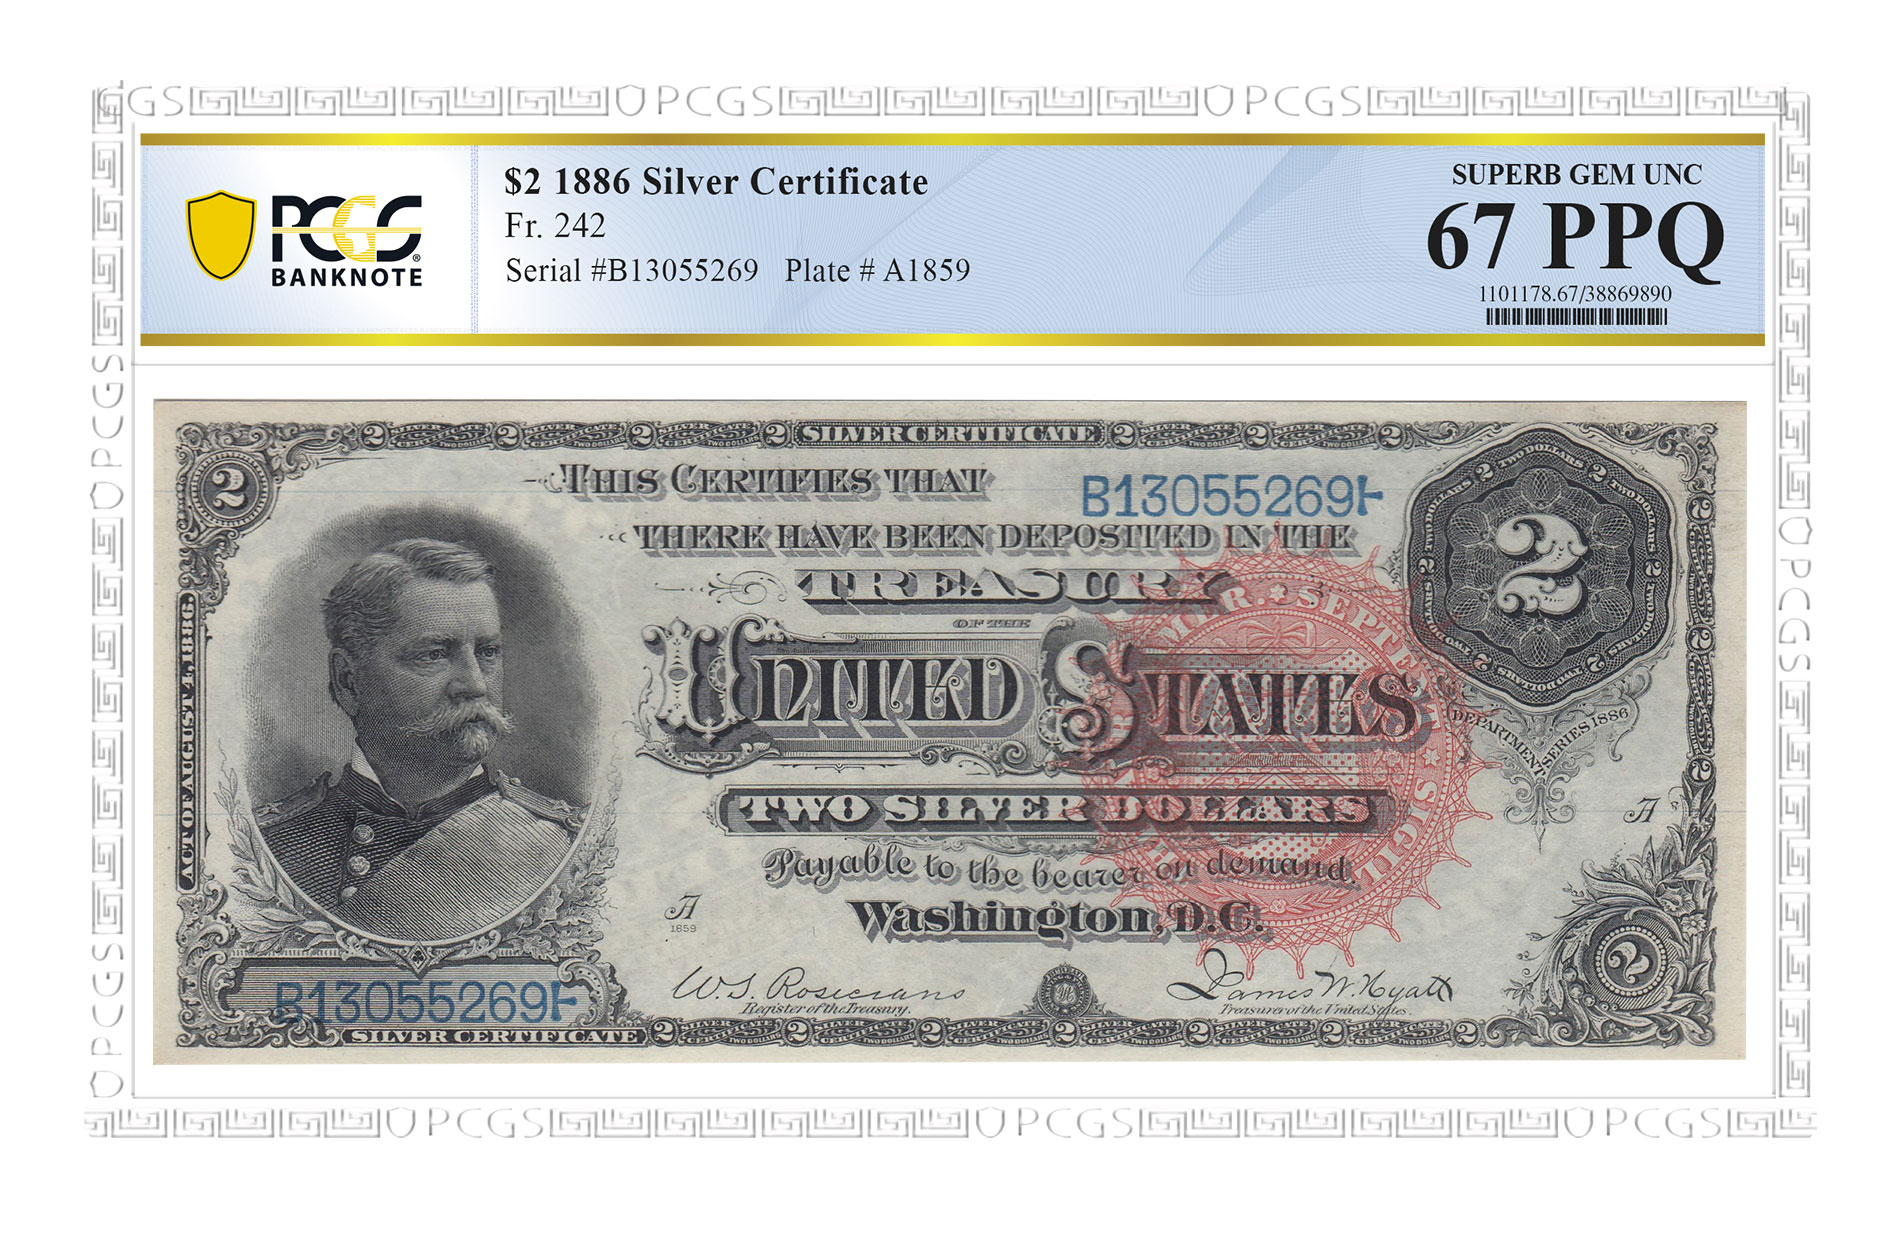 Obverse of Series of 1886 $2 Silver Certificate. Superb Gem UNC 67 PPQ. Image courtesy PCGS